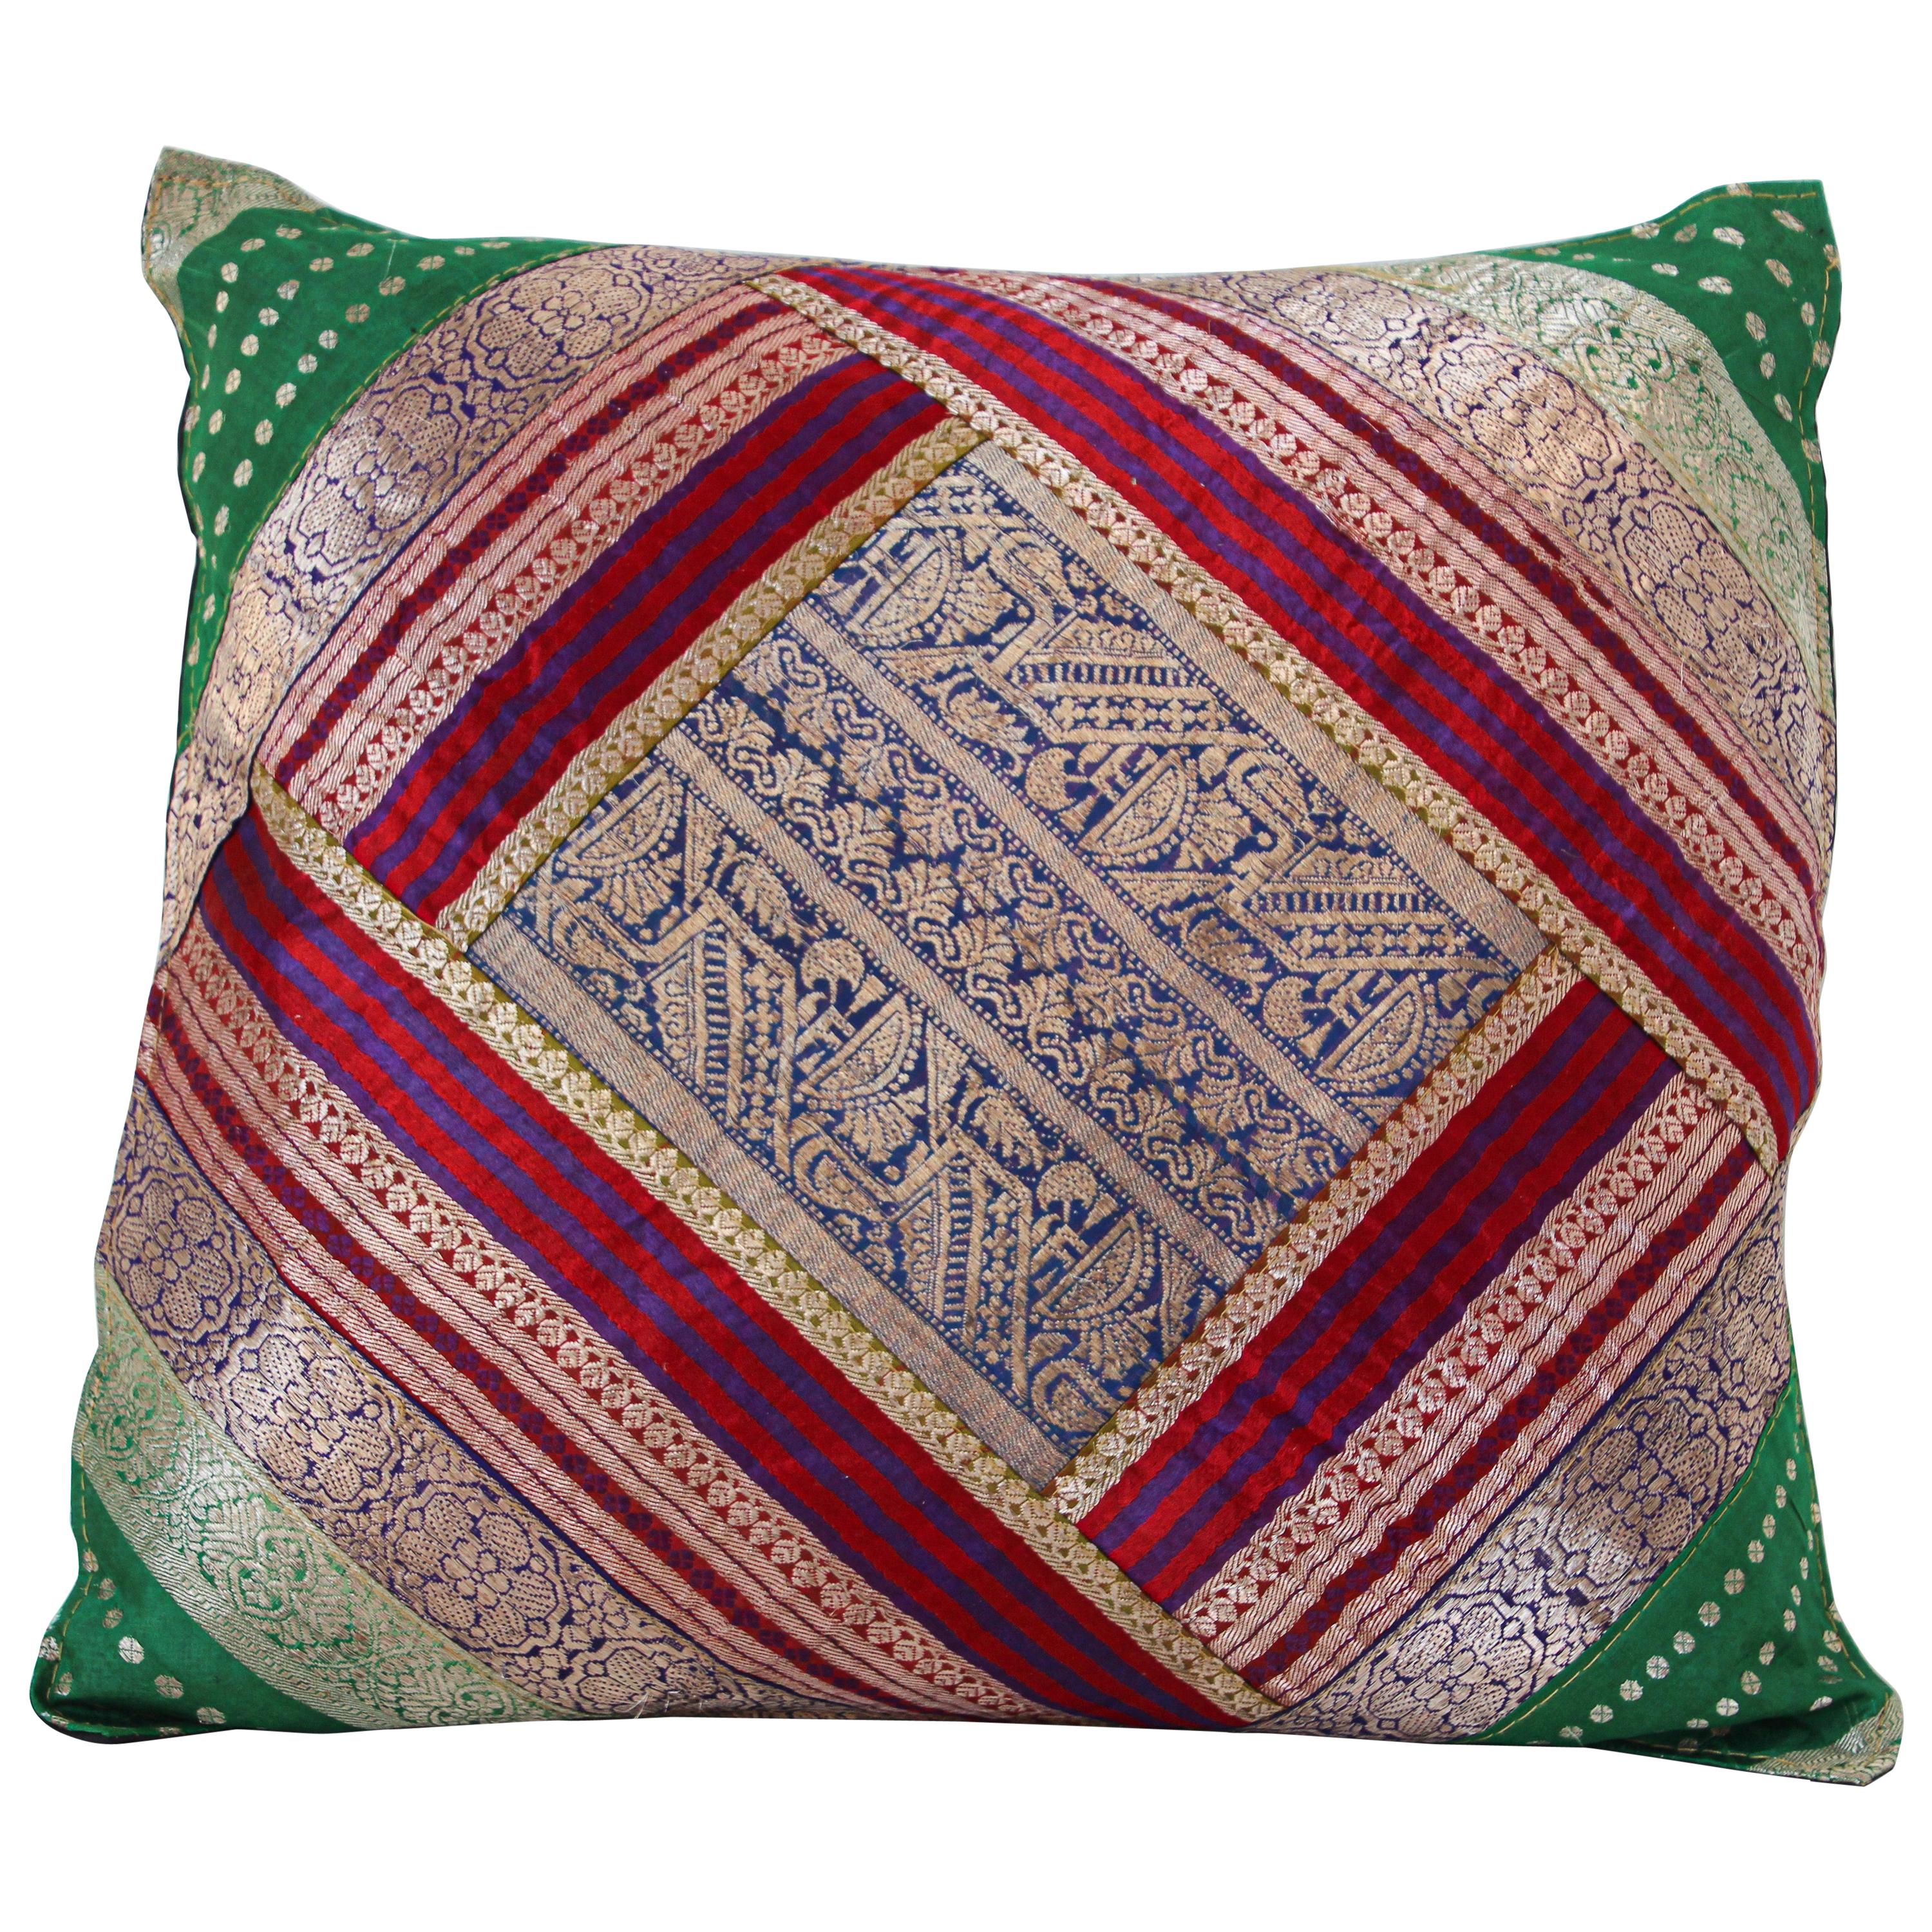 https://a.1stdibscdn.com/decorative-throw-pillow-made-from-vintage-sari-borders-india-for-sale/1121189/f_203906221598913606656/20390622_master.jpg